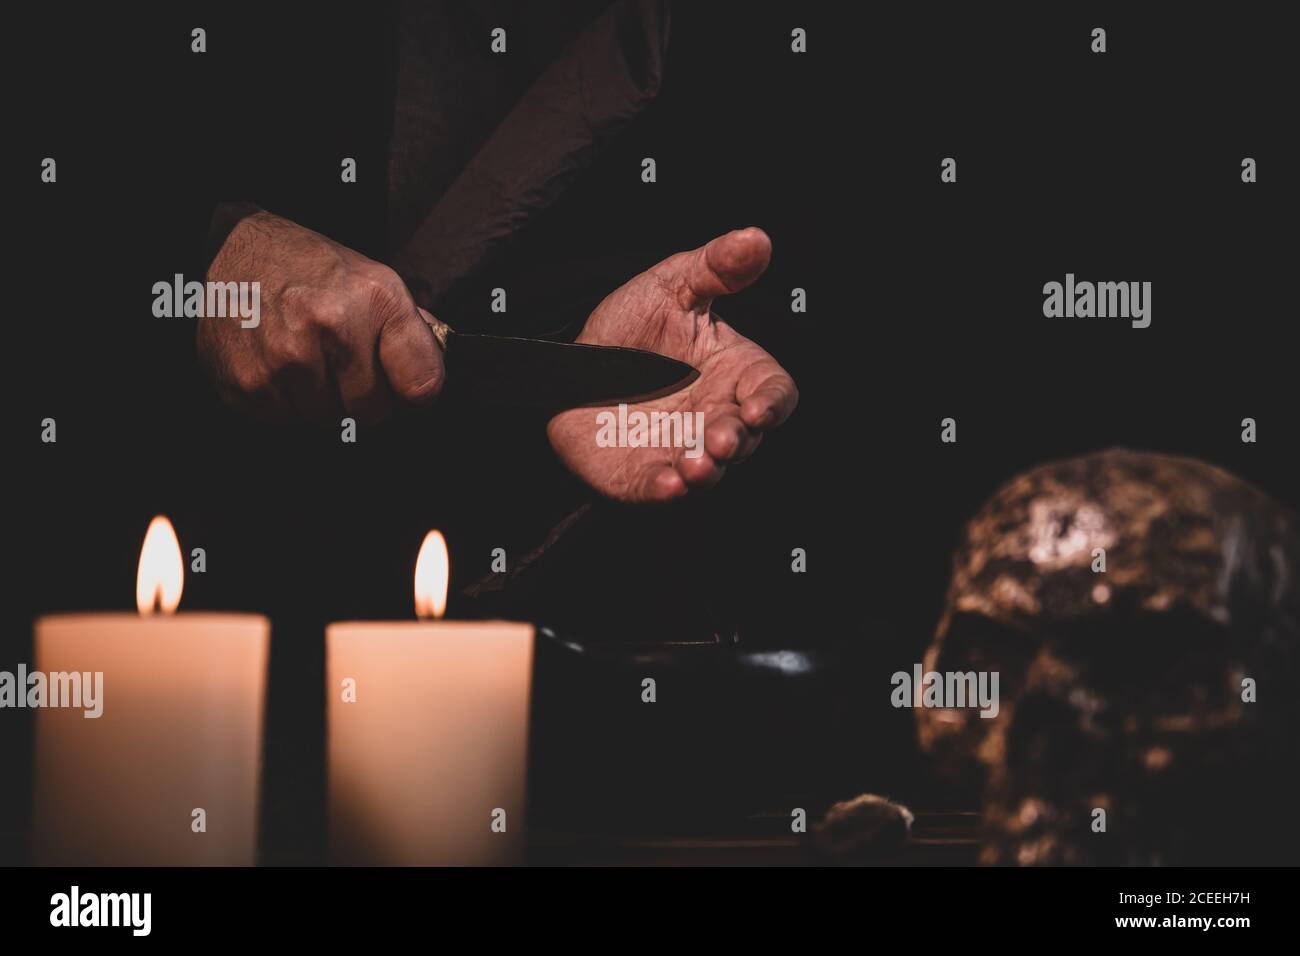 Blood Ritual, preparation with an knife, occultly witchcraft or cult, dark background with candles and a human skull Stock Photo